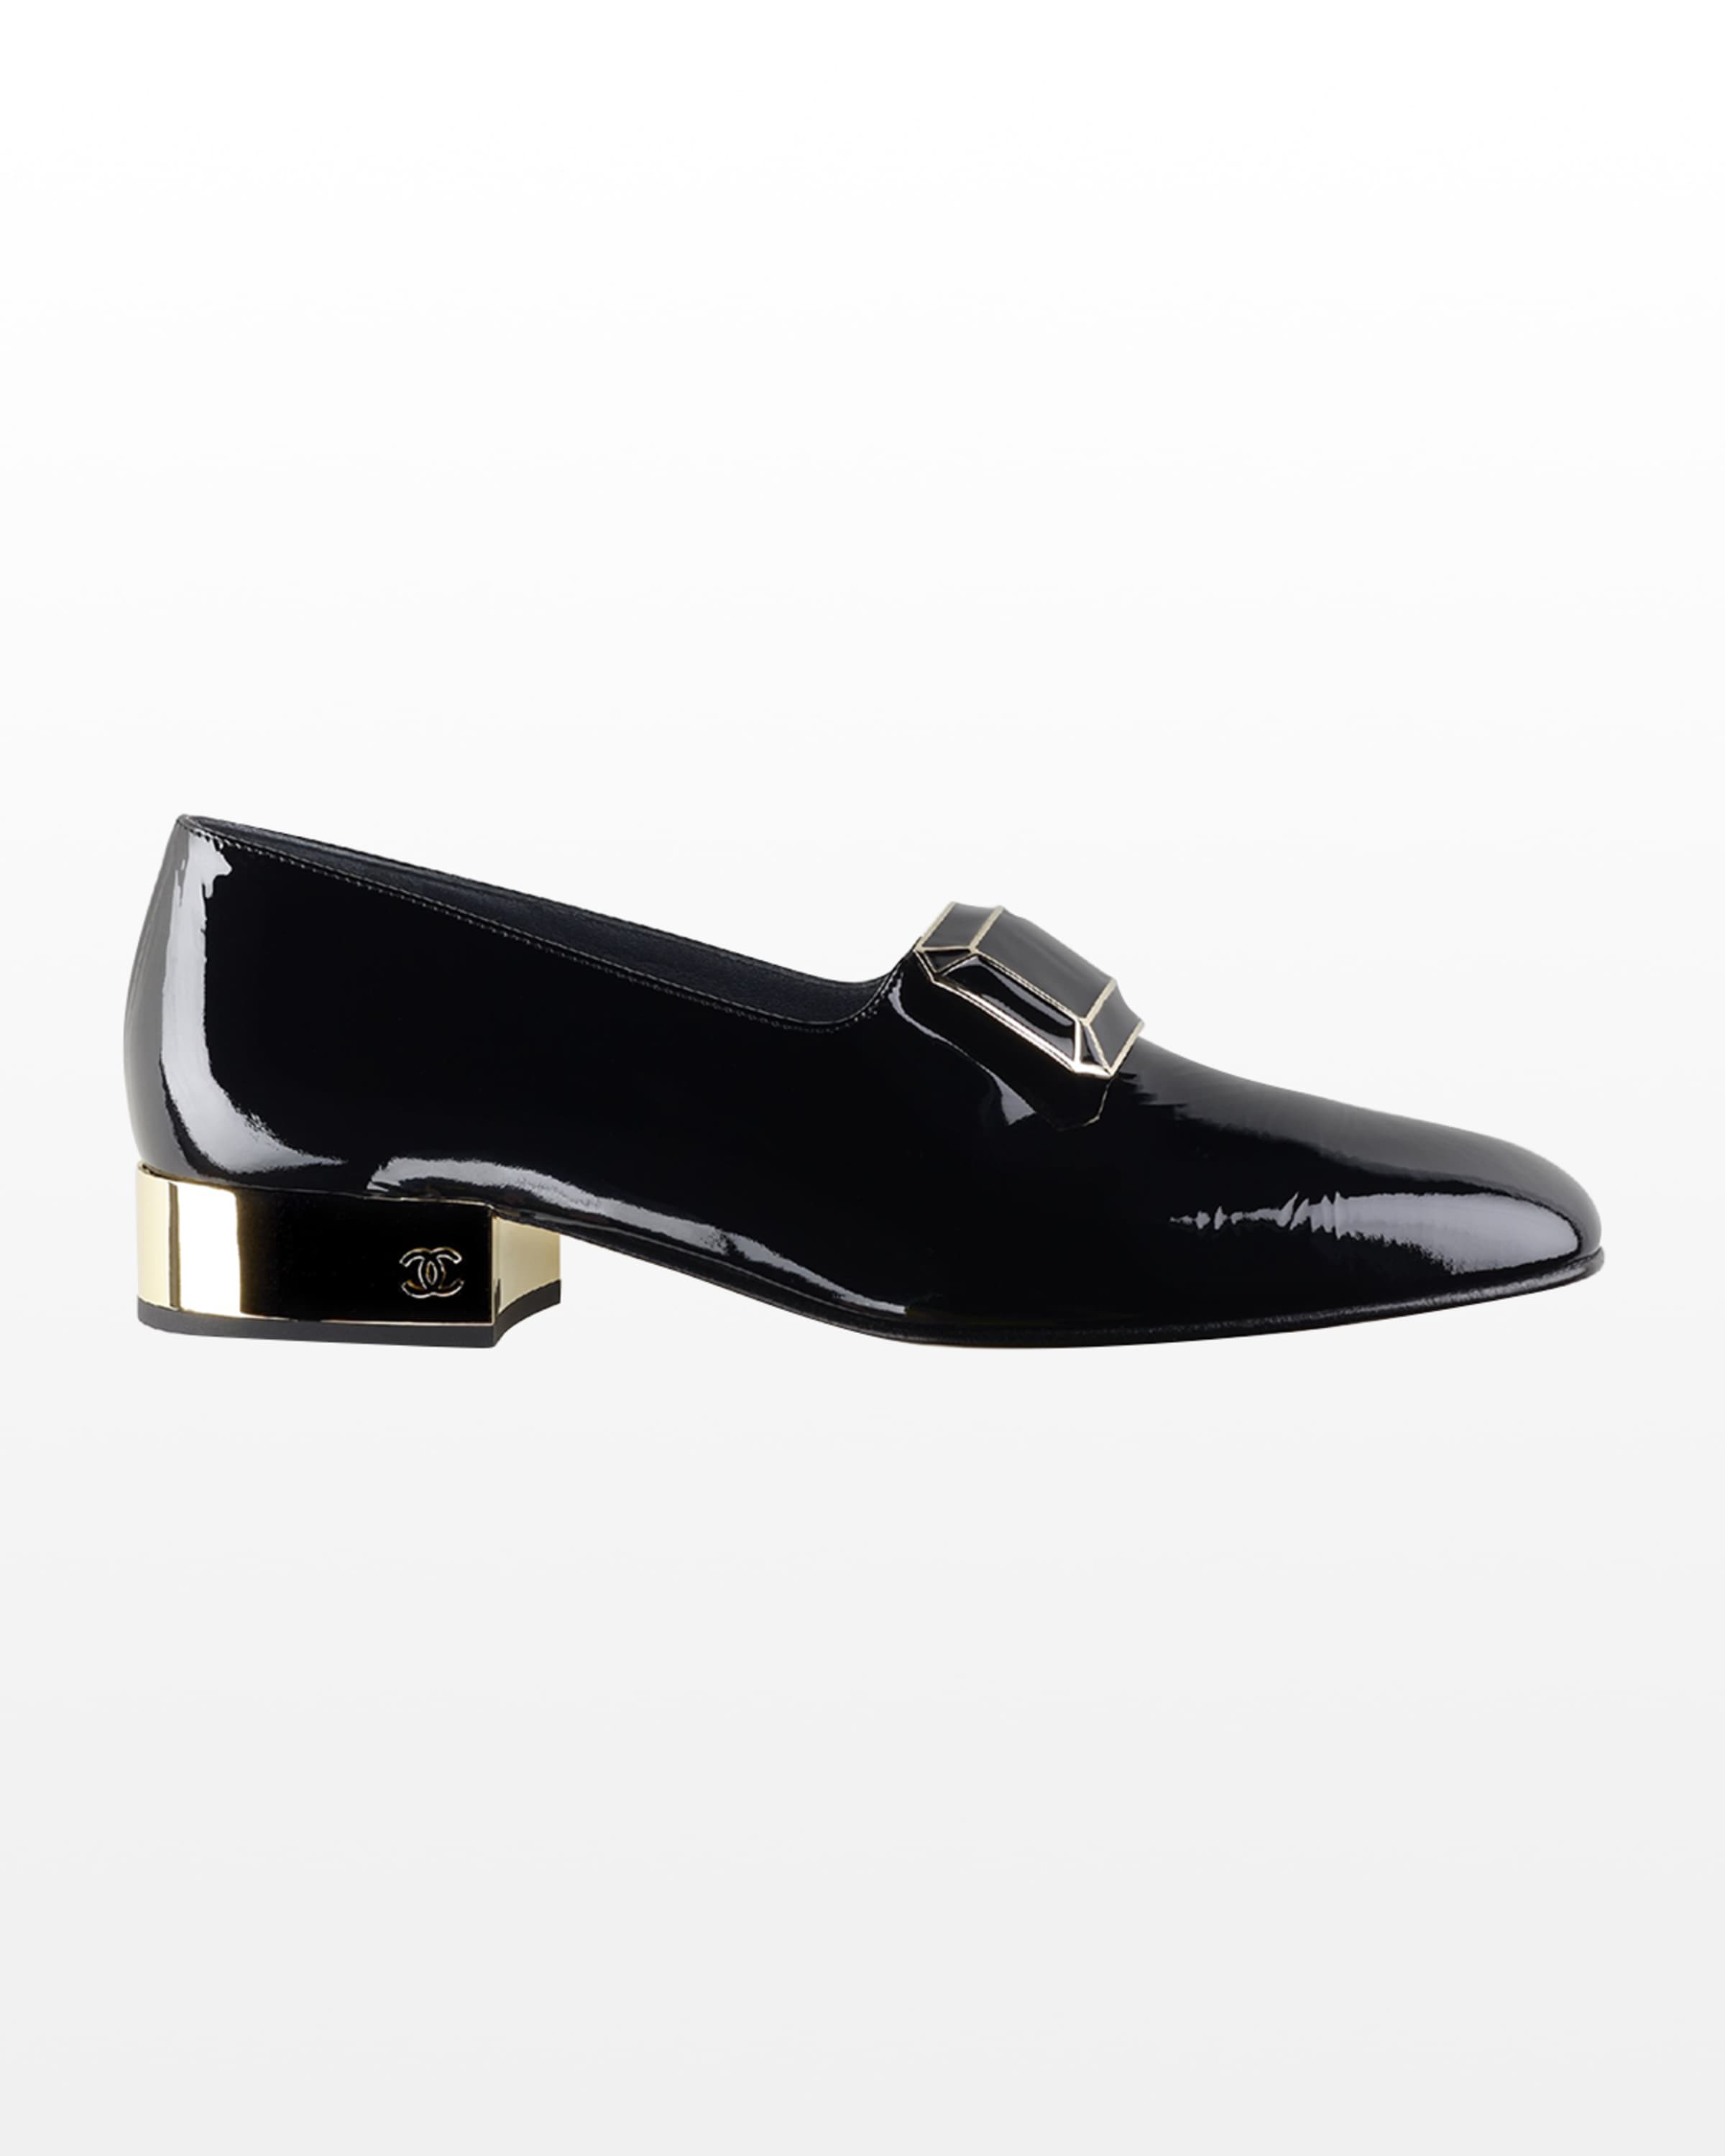 CHANEL LOAFERS | Neiman Marcus